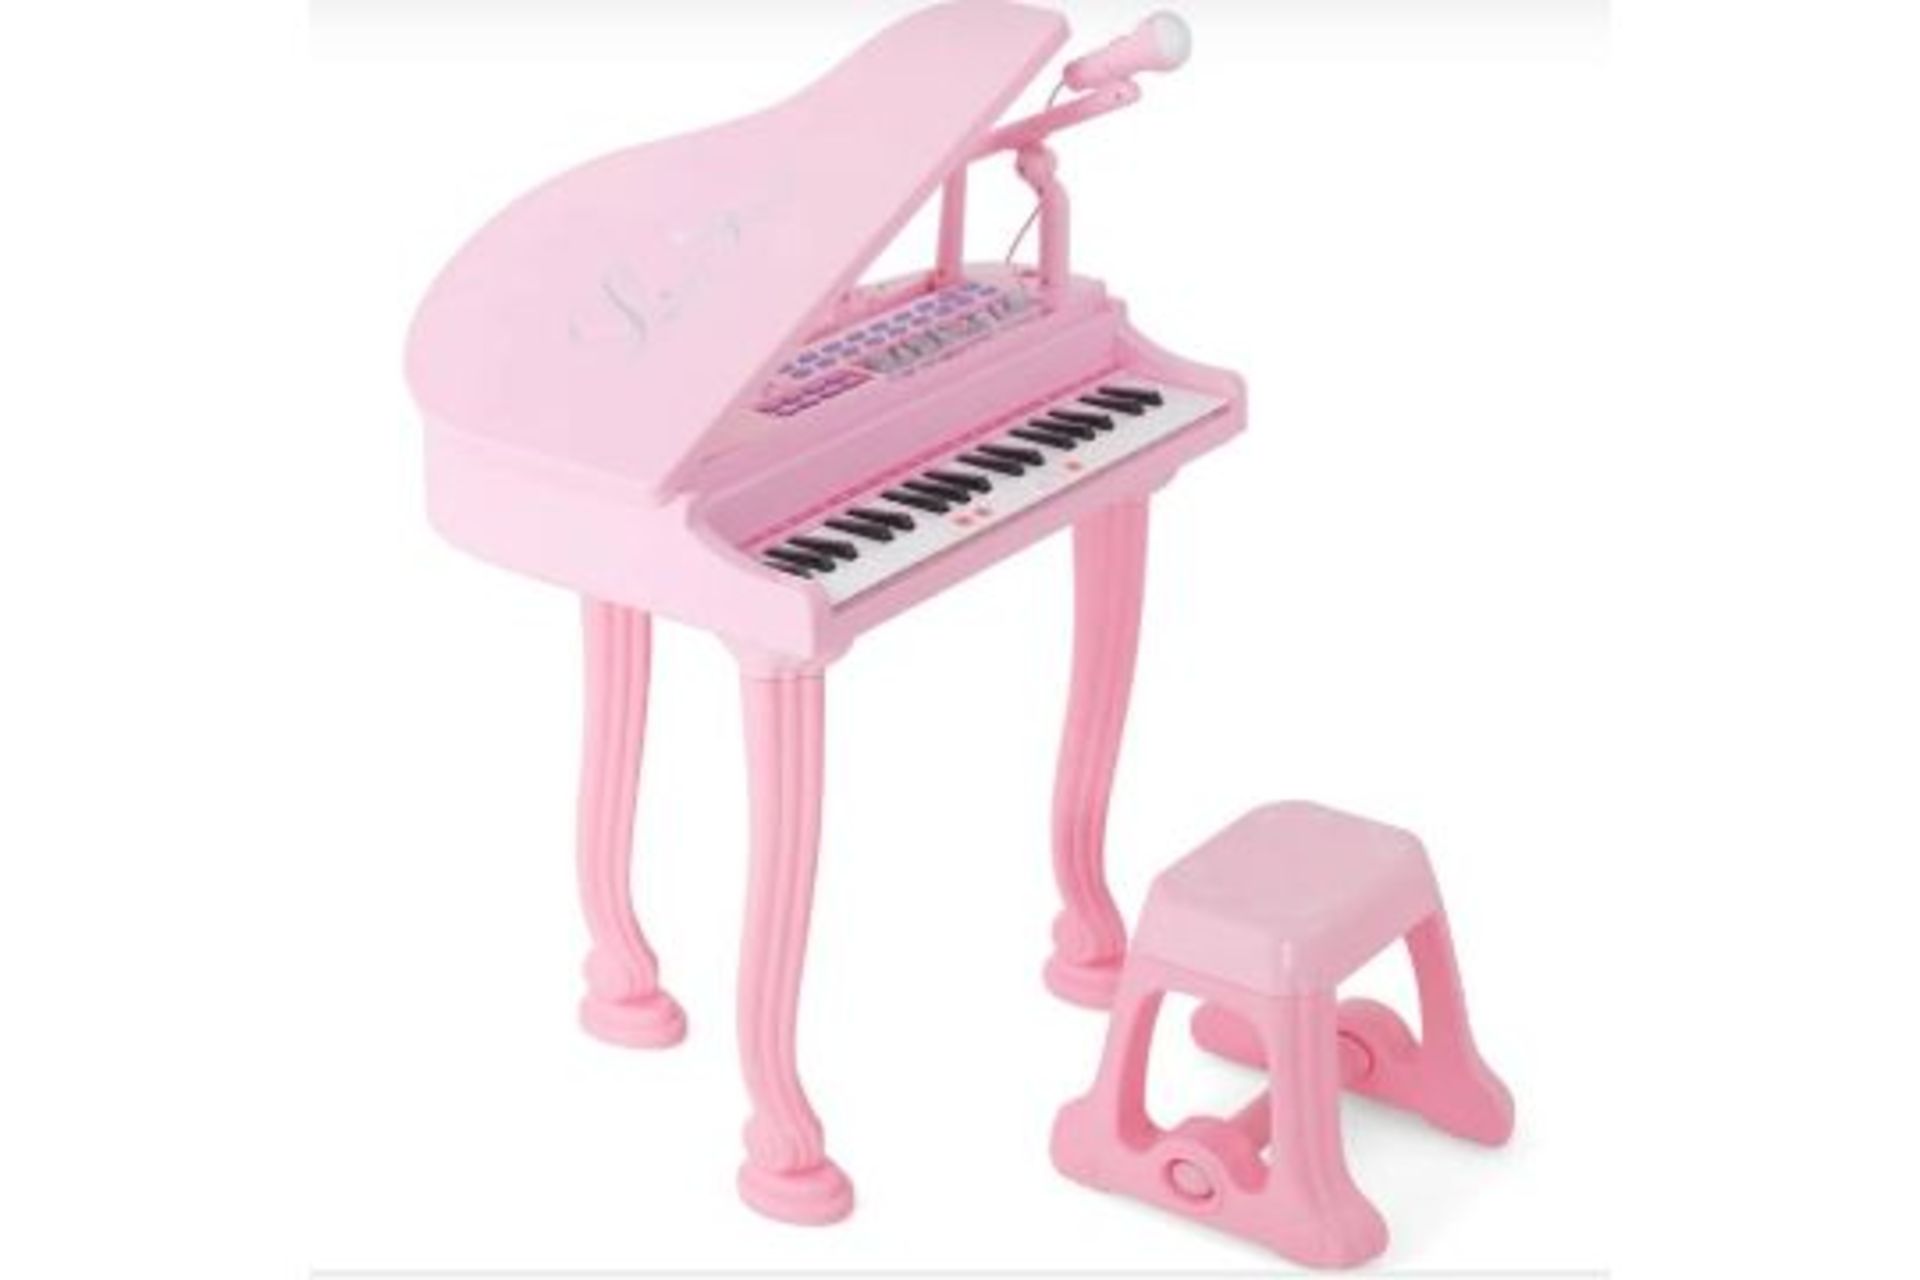 37-KEY KIDS PIANO KEYBOARDS WITH MICROPHONE AND TEACHING MODE-PINK. - R14.8. The 37 keys made of